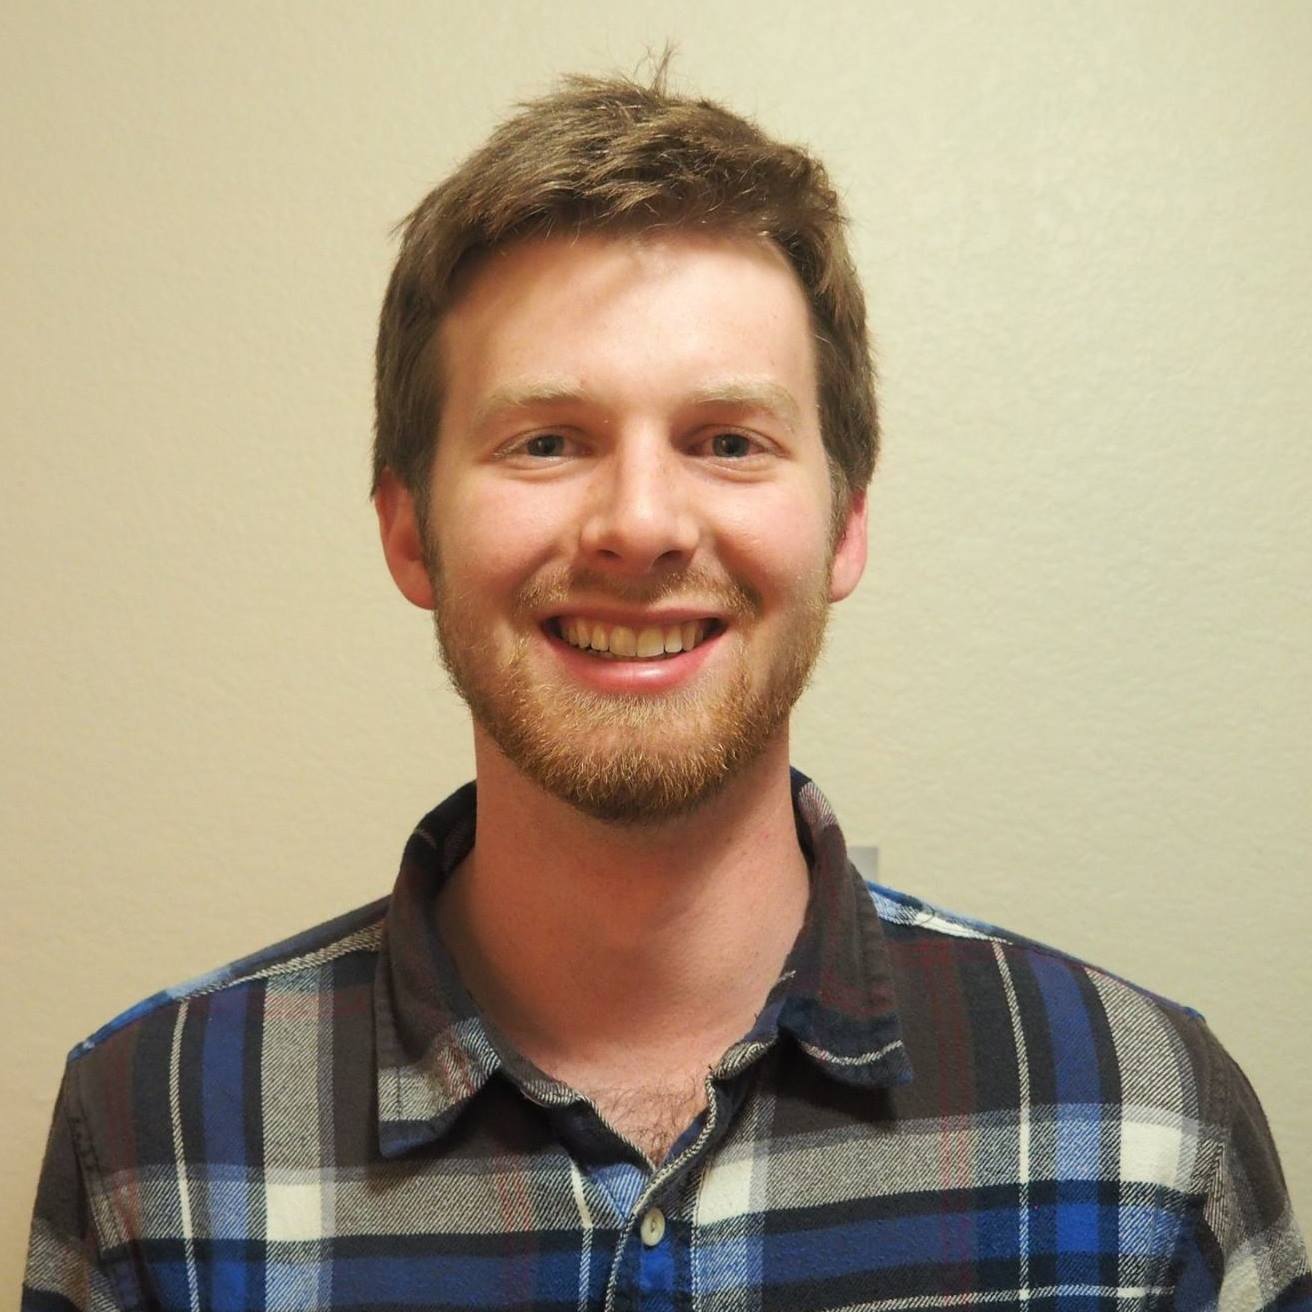 <h3>Stephen Marsh</h3><br><h4>MSc, Geophysics (2016~)<br>Building community velocity model in Oklahoma</h4><br> Stephen Marsh is a graduate student studying Geophysics at the University of Oklahoma. He also has a Bachelor’s Degree in Exploration Geophysics. As an undergraduate he compiled a fault map of Oklahoma and published a thesis titled “Comprehensive Fault Database and Interpretive Fault Map of Oklahoma” under the direction of Dr. Austin Holland. He is currently looking at Ambient Noise Seismic Tomography as the topic for his graduate thesis and plans to graduate in May of 2018.